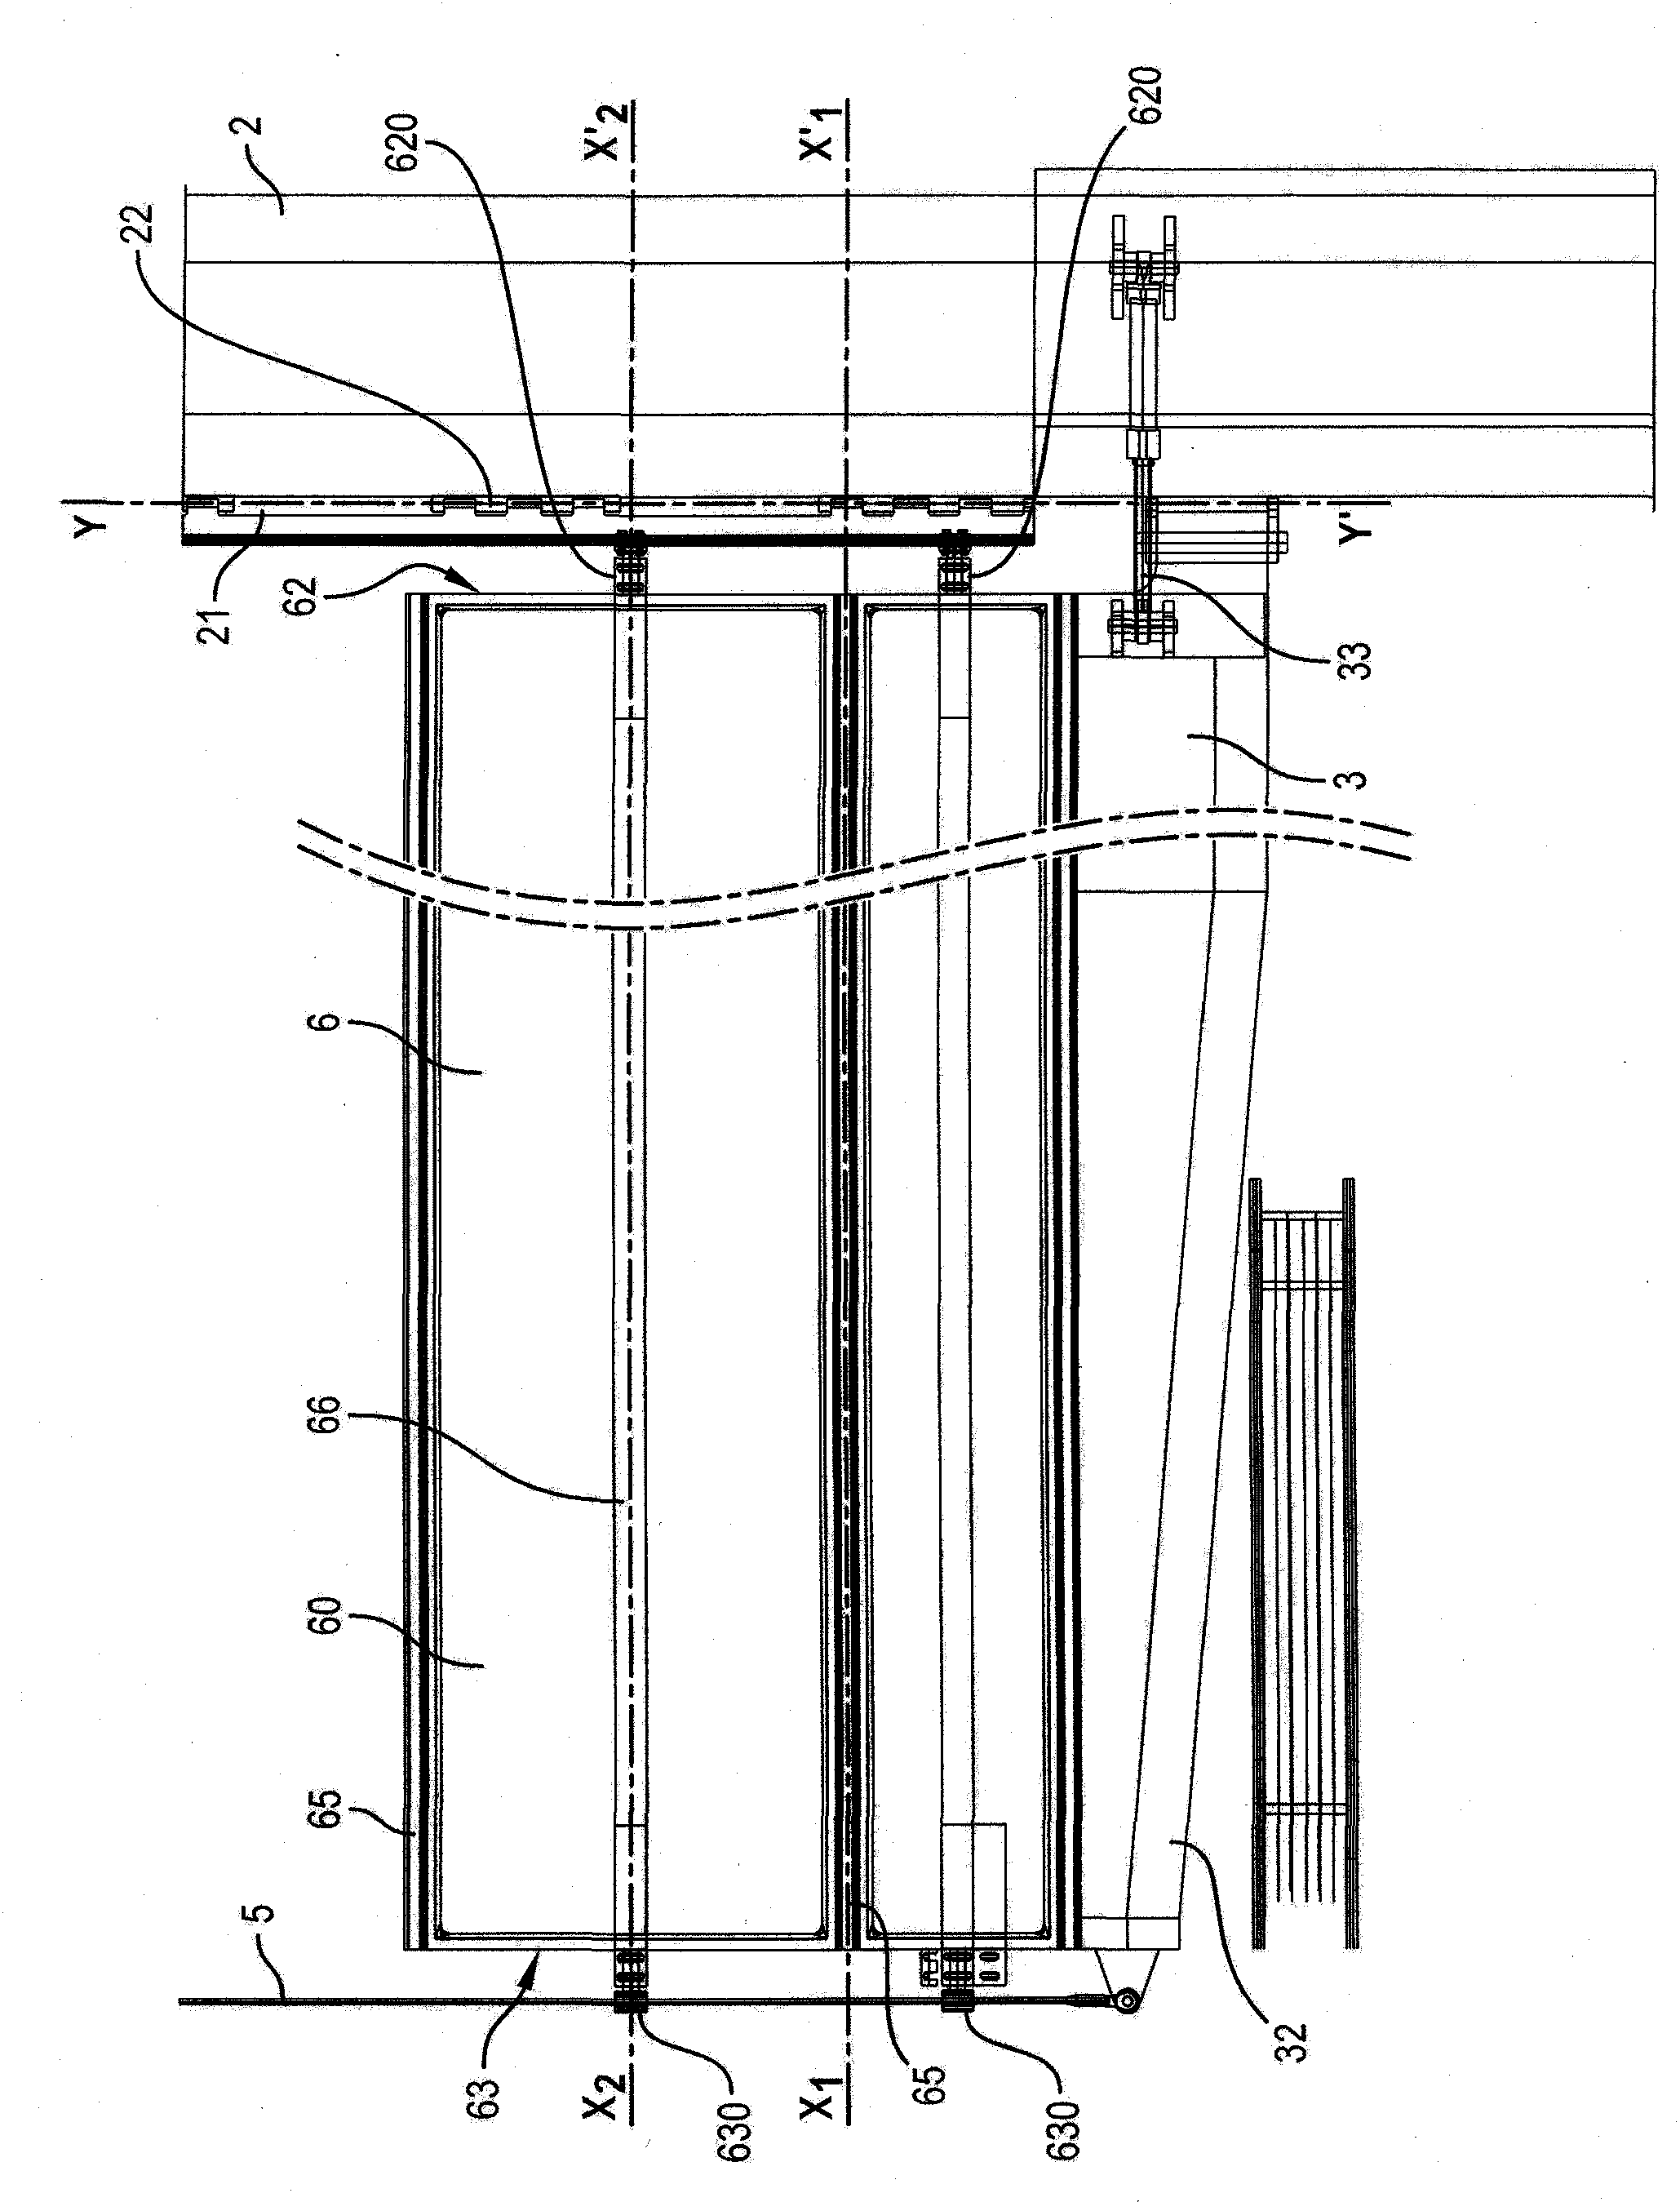 Mechanised device for rigging sail